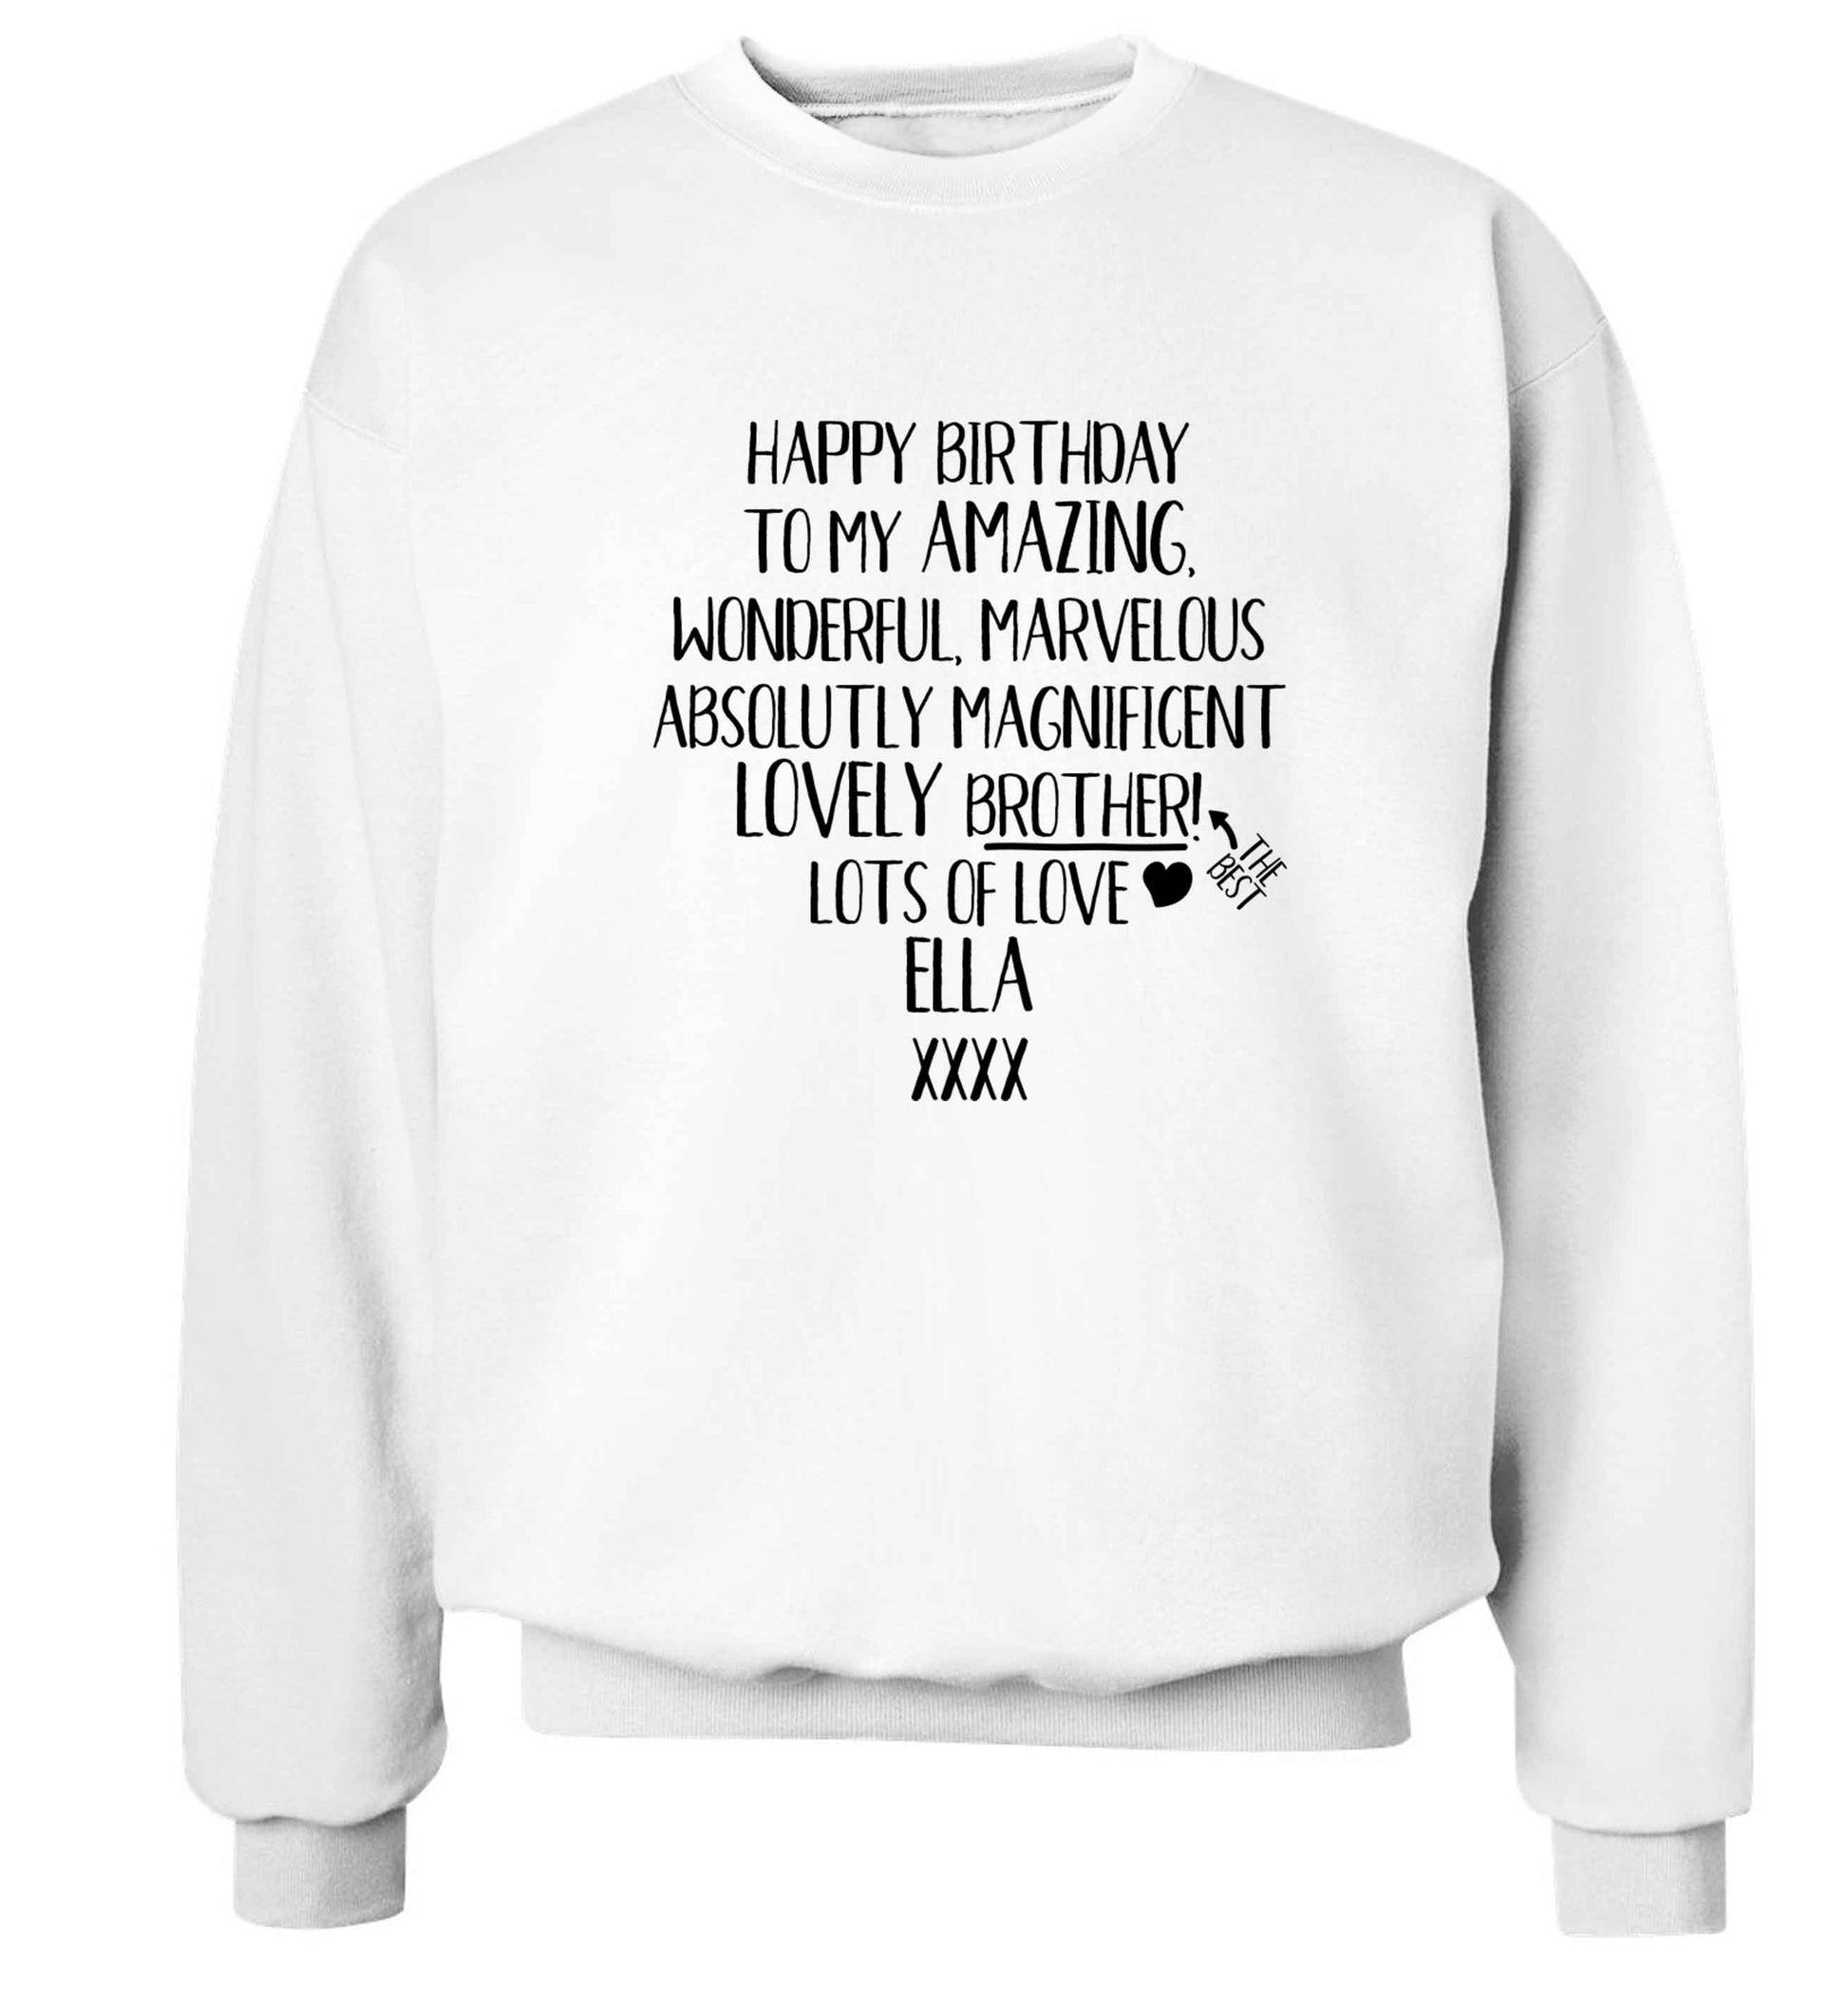 Personalised happy birthday to my amazing, wonderful, lovely brother Adult's unisex white Sweater 2XL